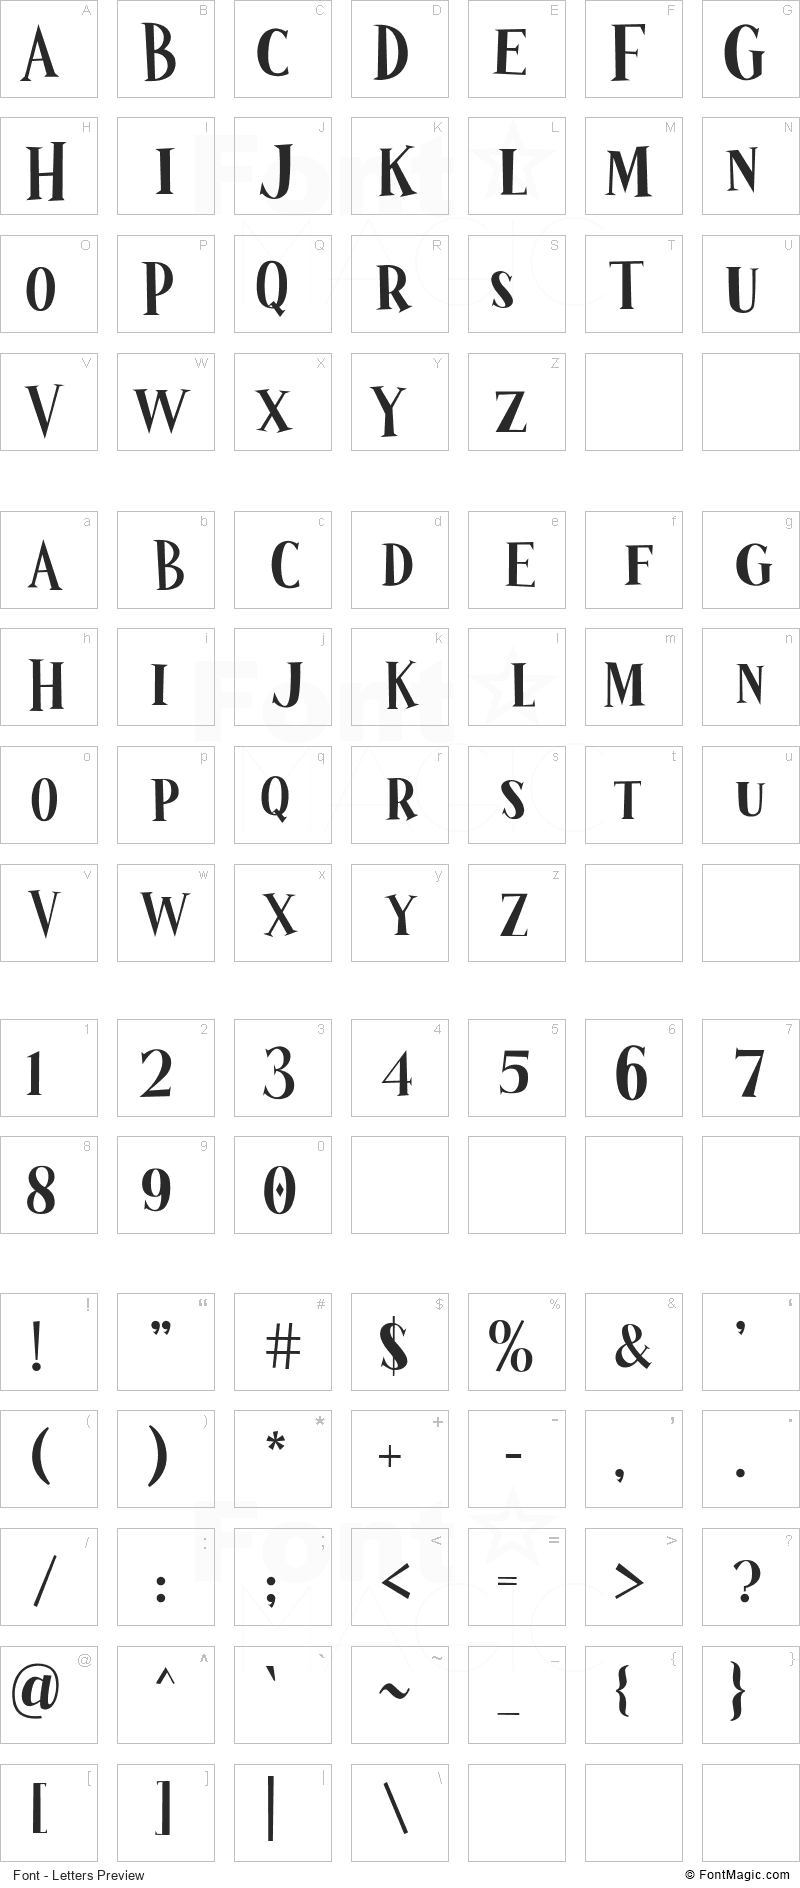 Wizardry Night Font - All Latters Preview Chart